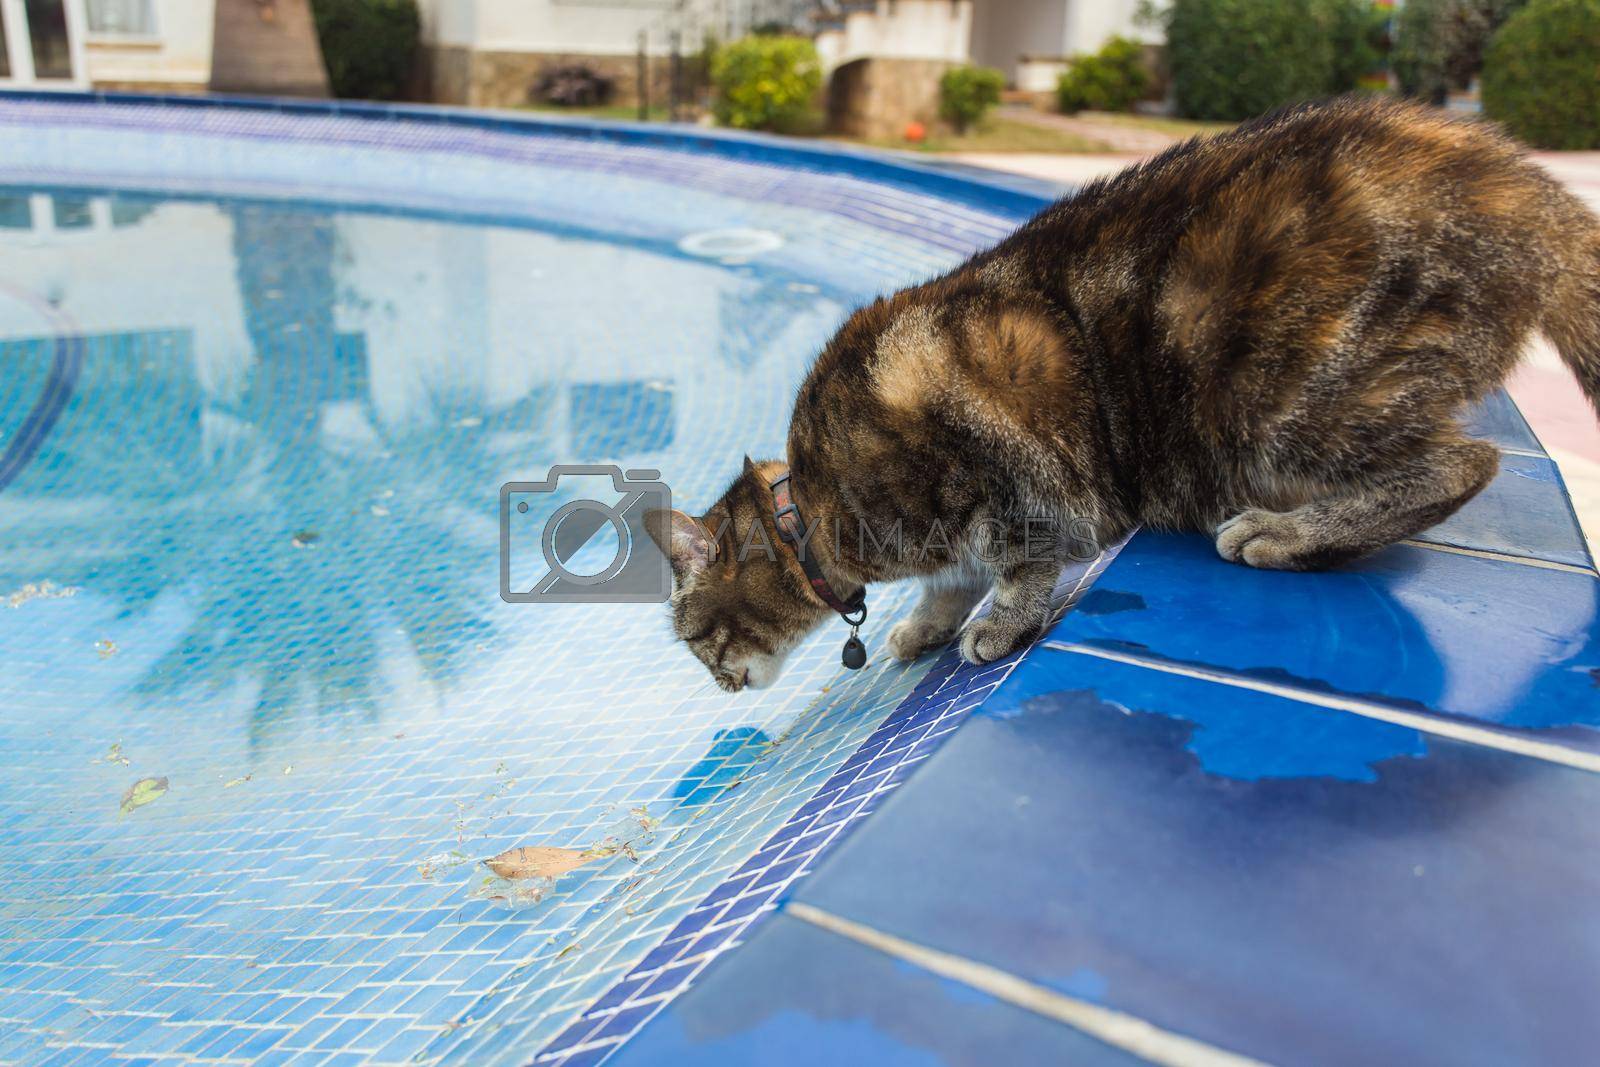 Royalty free image of Cute cat drinking water from swimming pool by Satura86